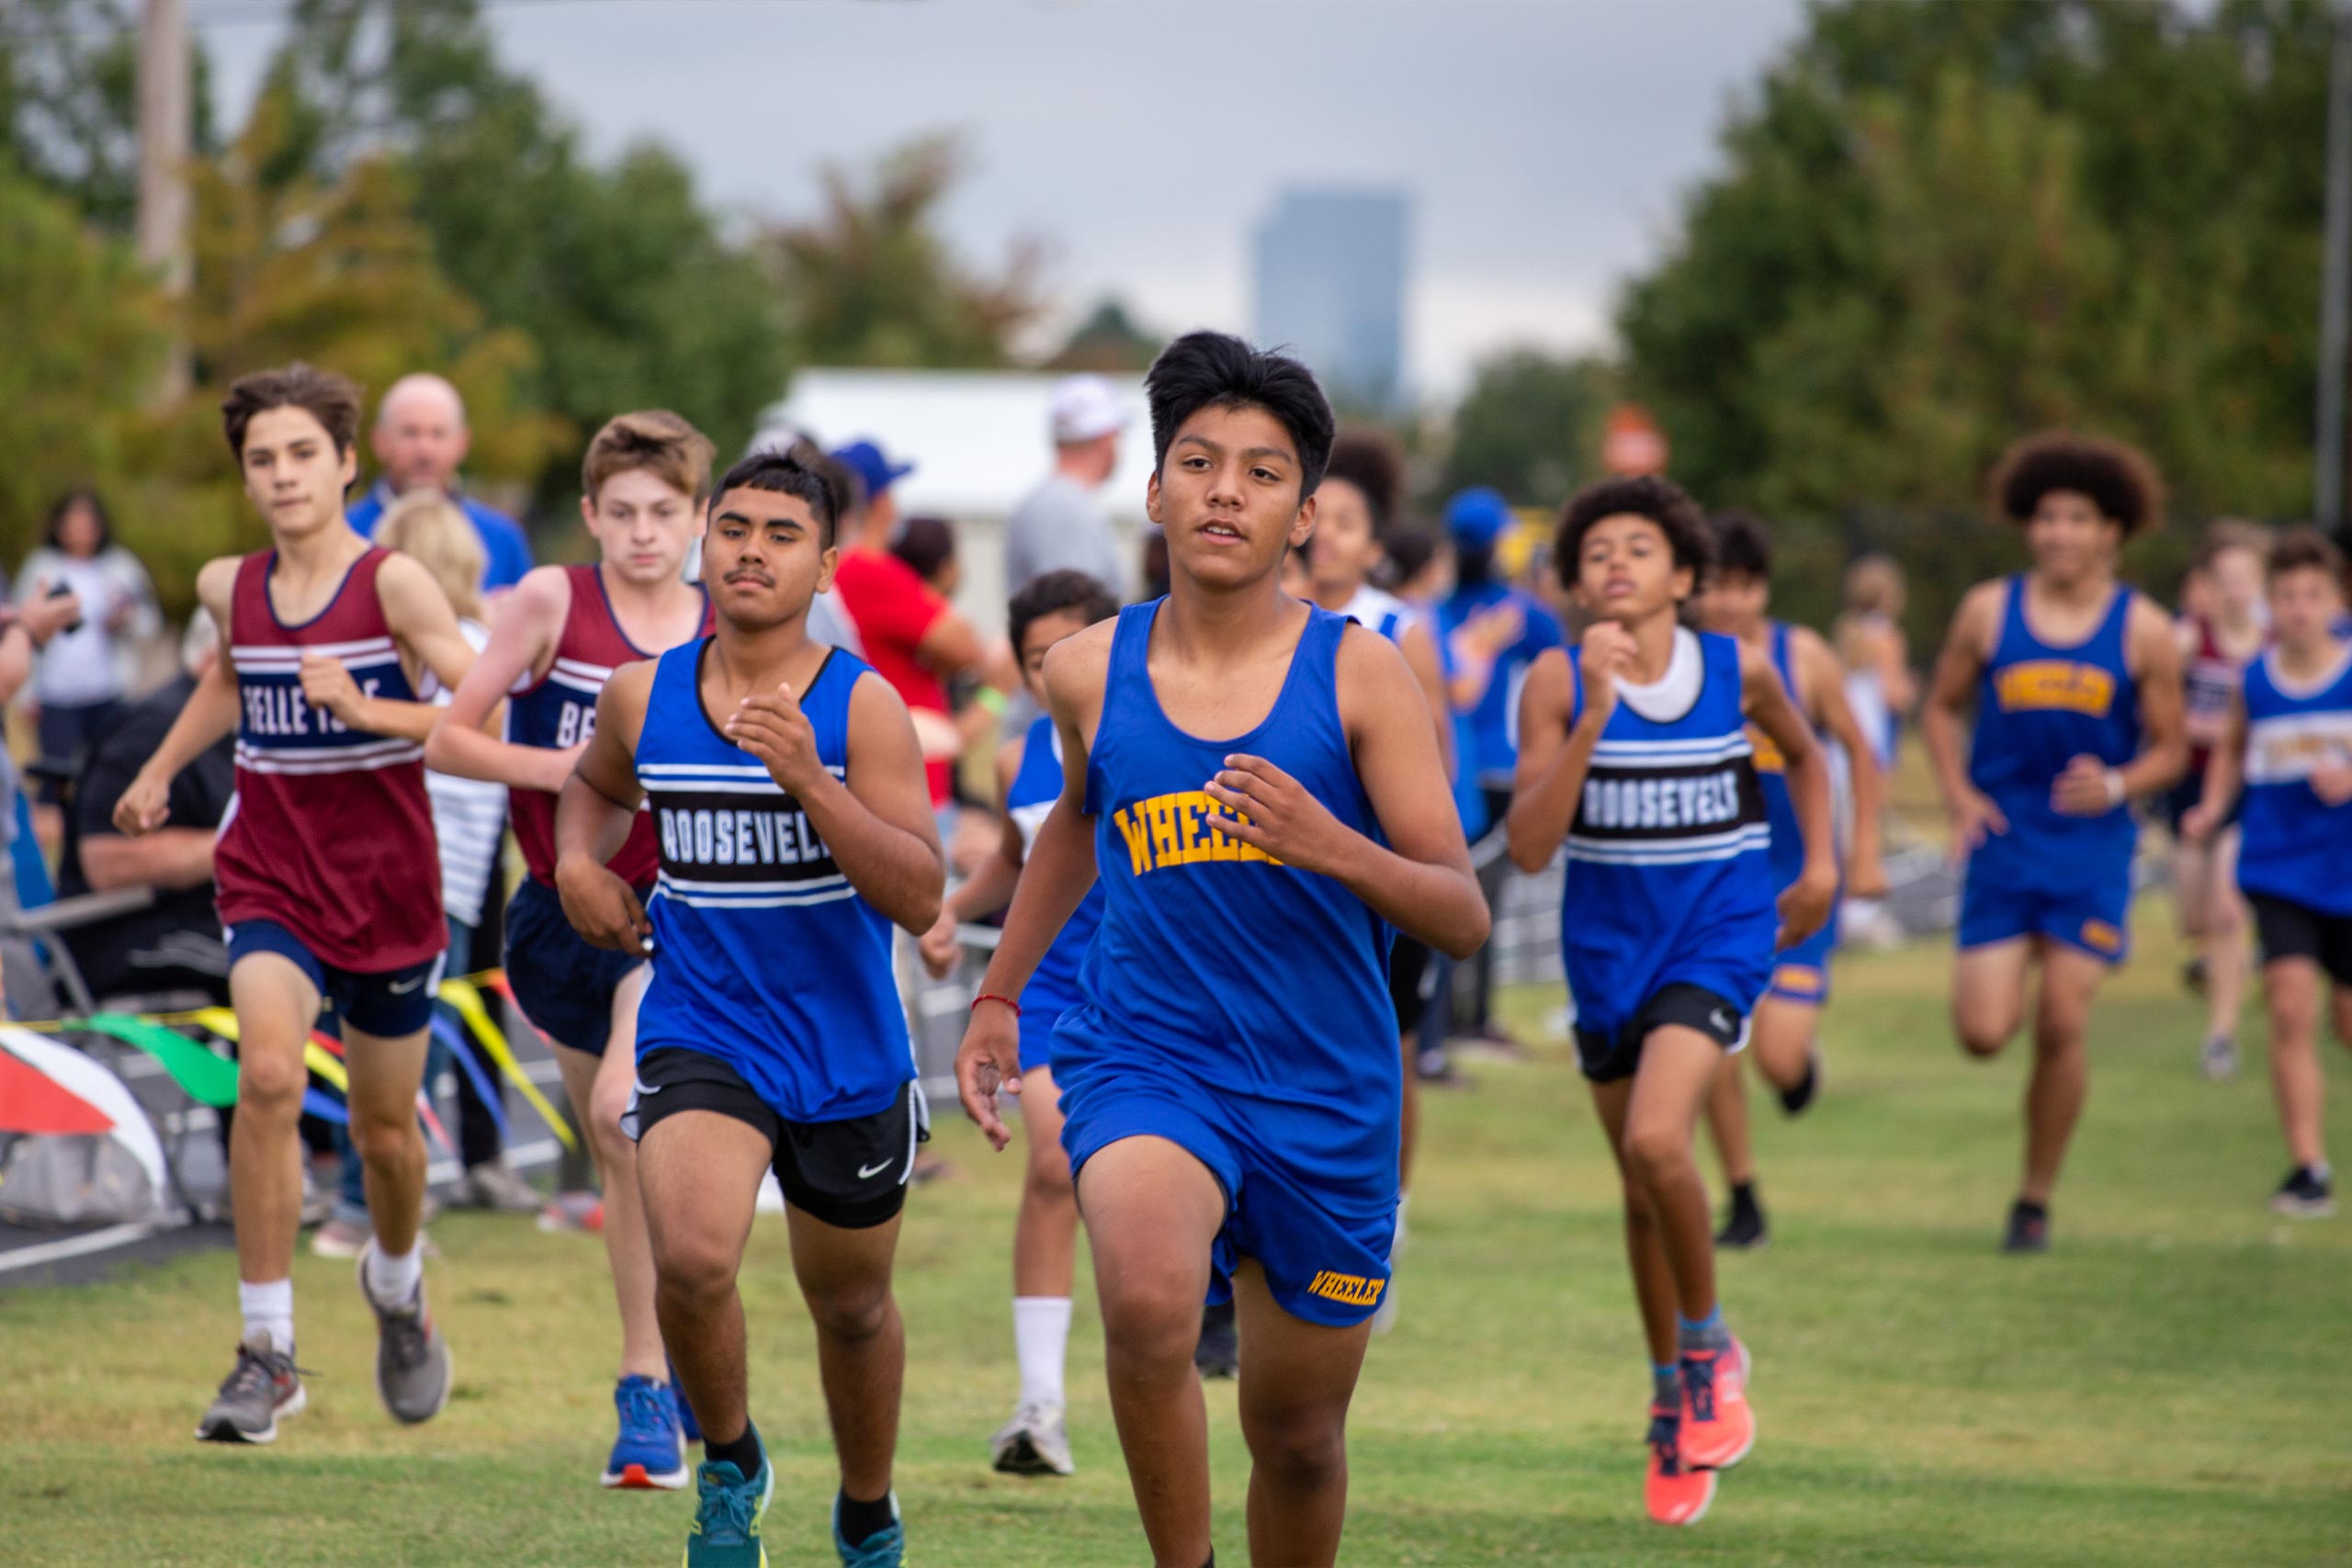 Fields & Futures Simon Greiner Program All-City Athletic Conference gallery image of OKCPS middle school runners